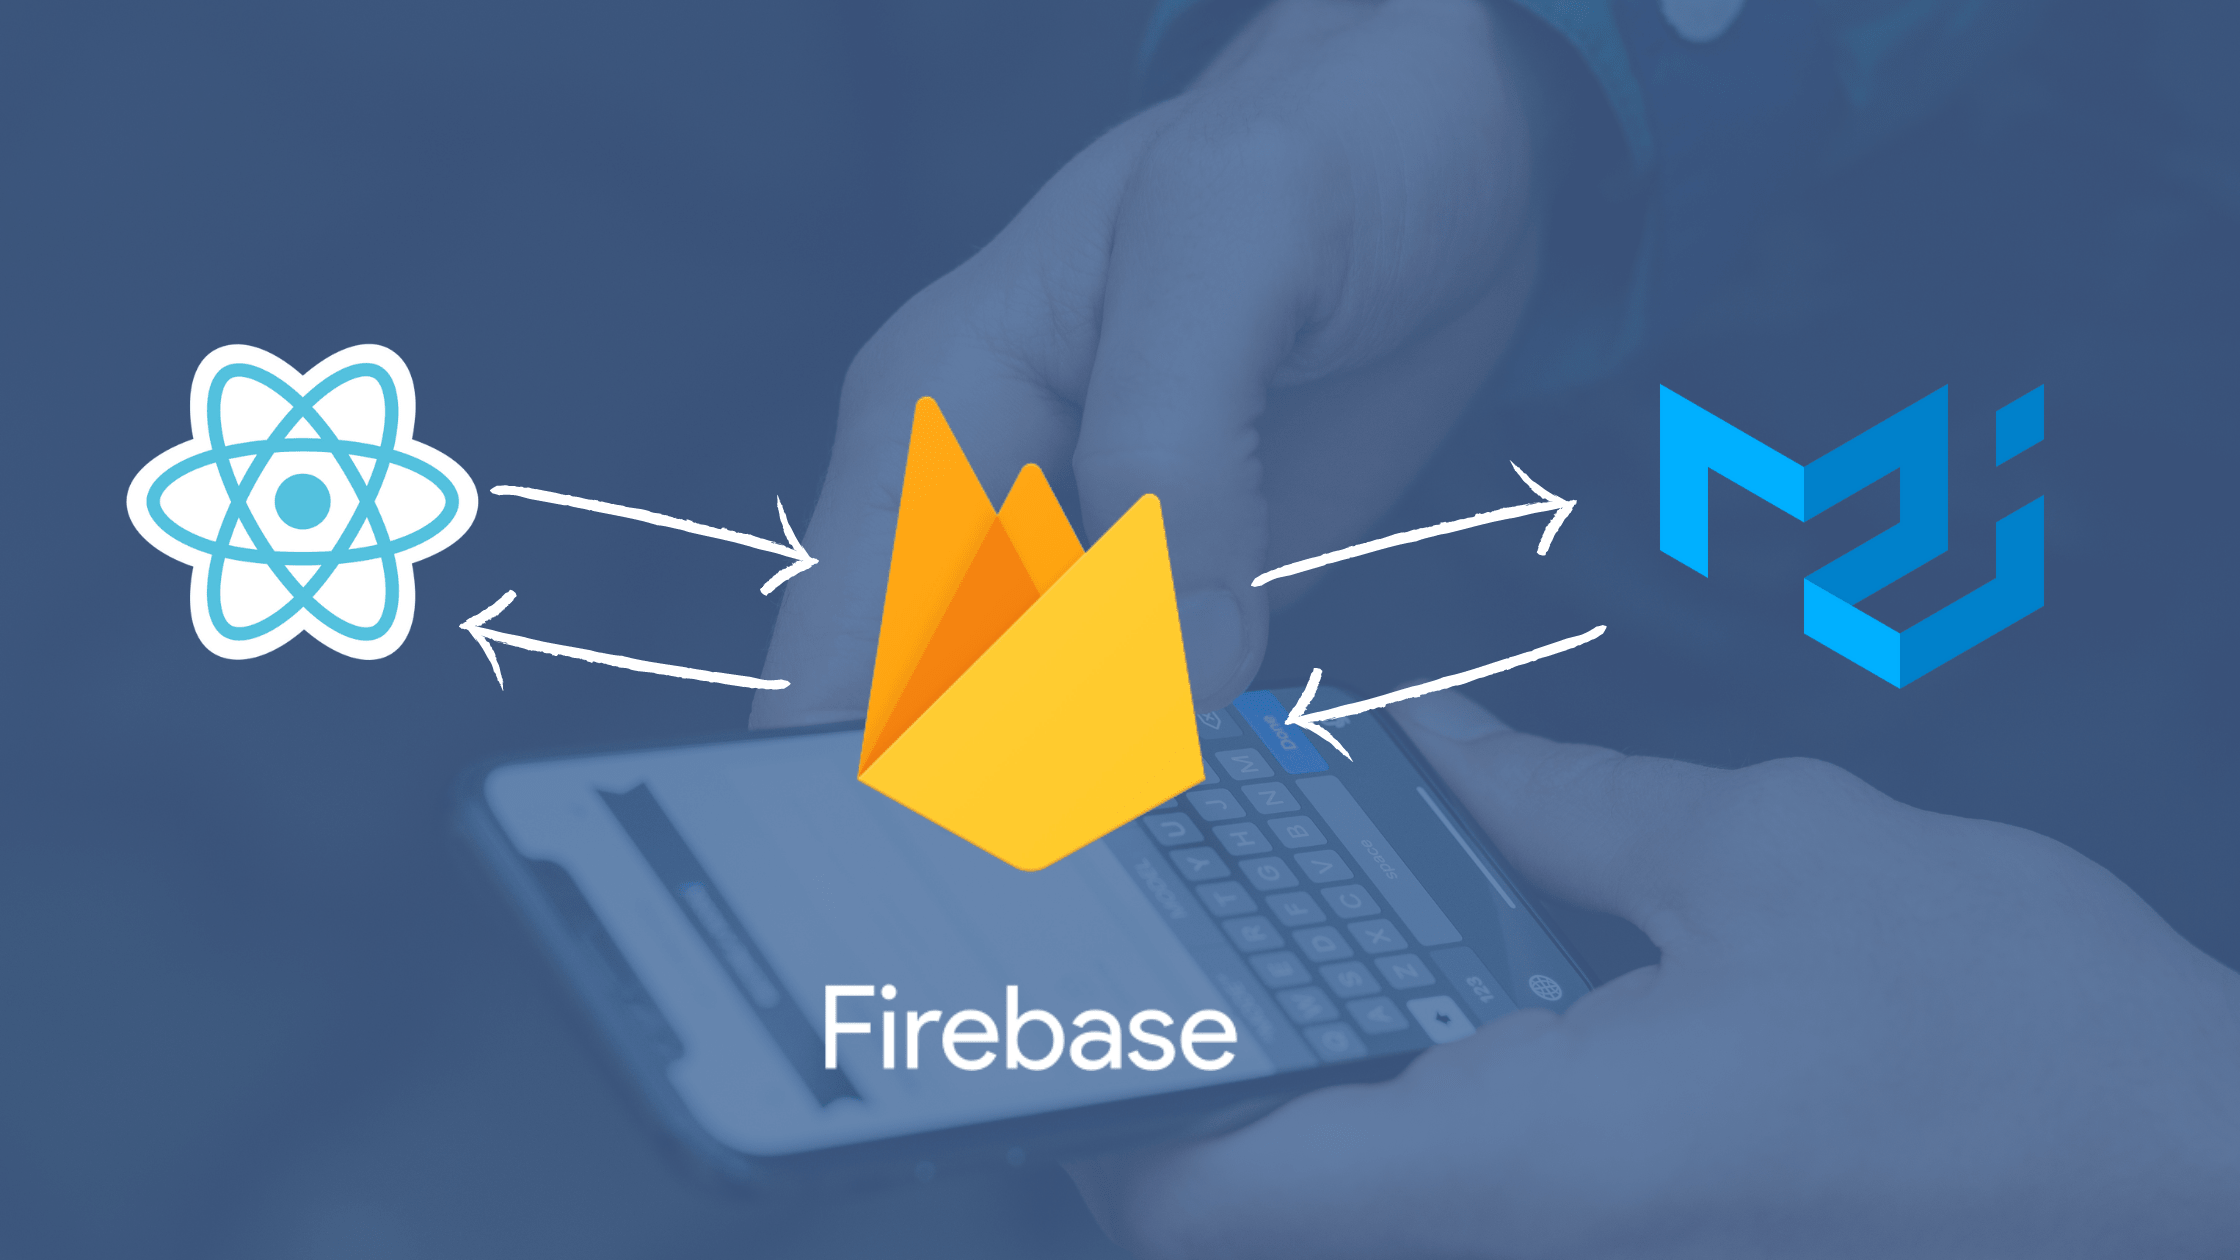 Real-time Chat Application with Firebase and Material UI